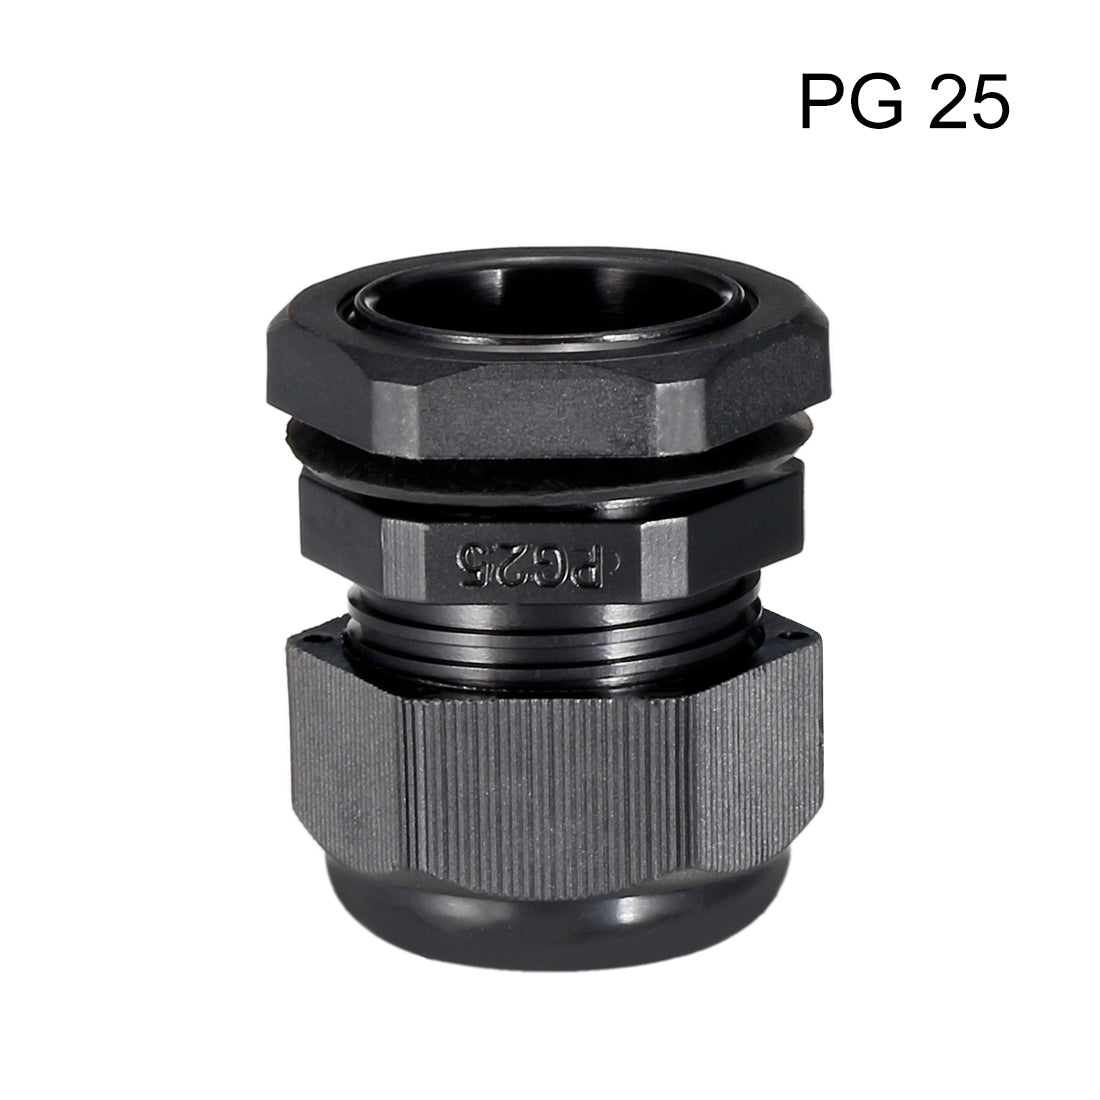 uxcell Uxcell PG25 Cable Gland Waterproof Plastic Connector Adjustable Locknut Black for 16mm-21mm Dia Cable Wire